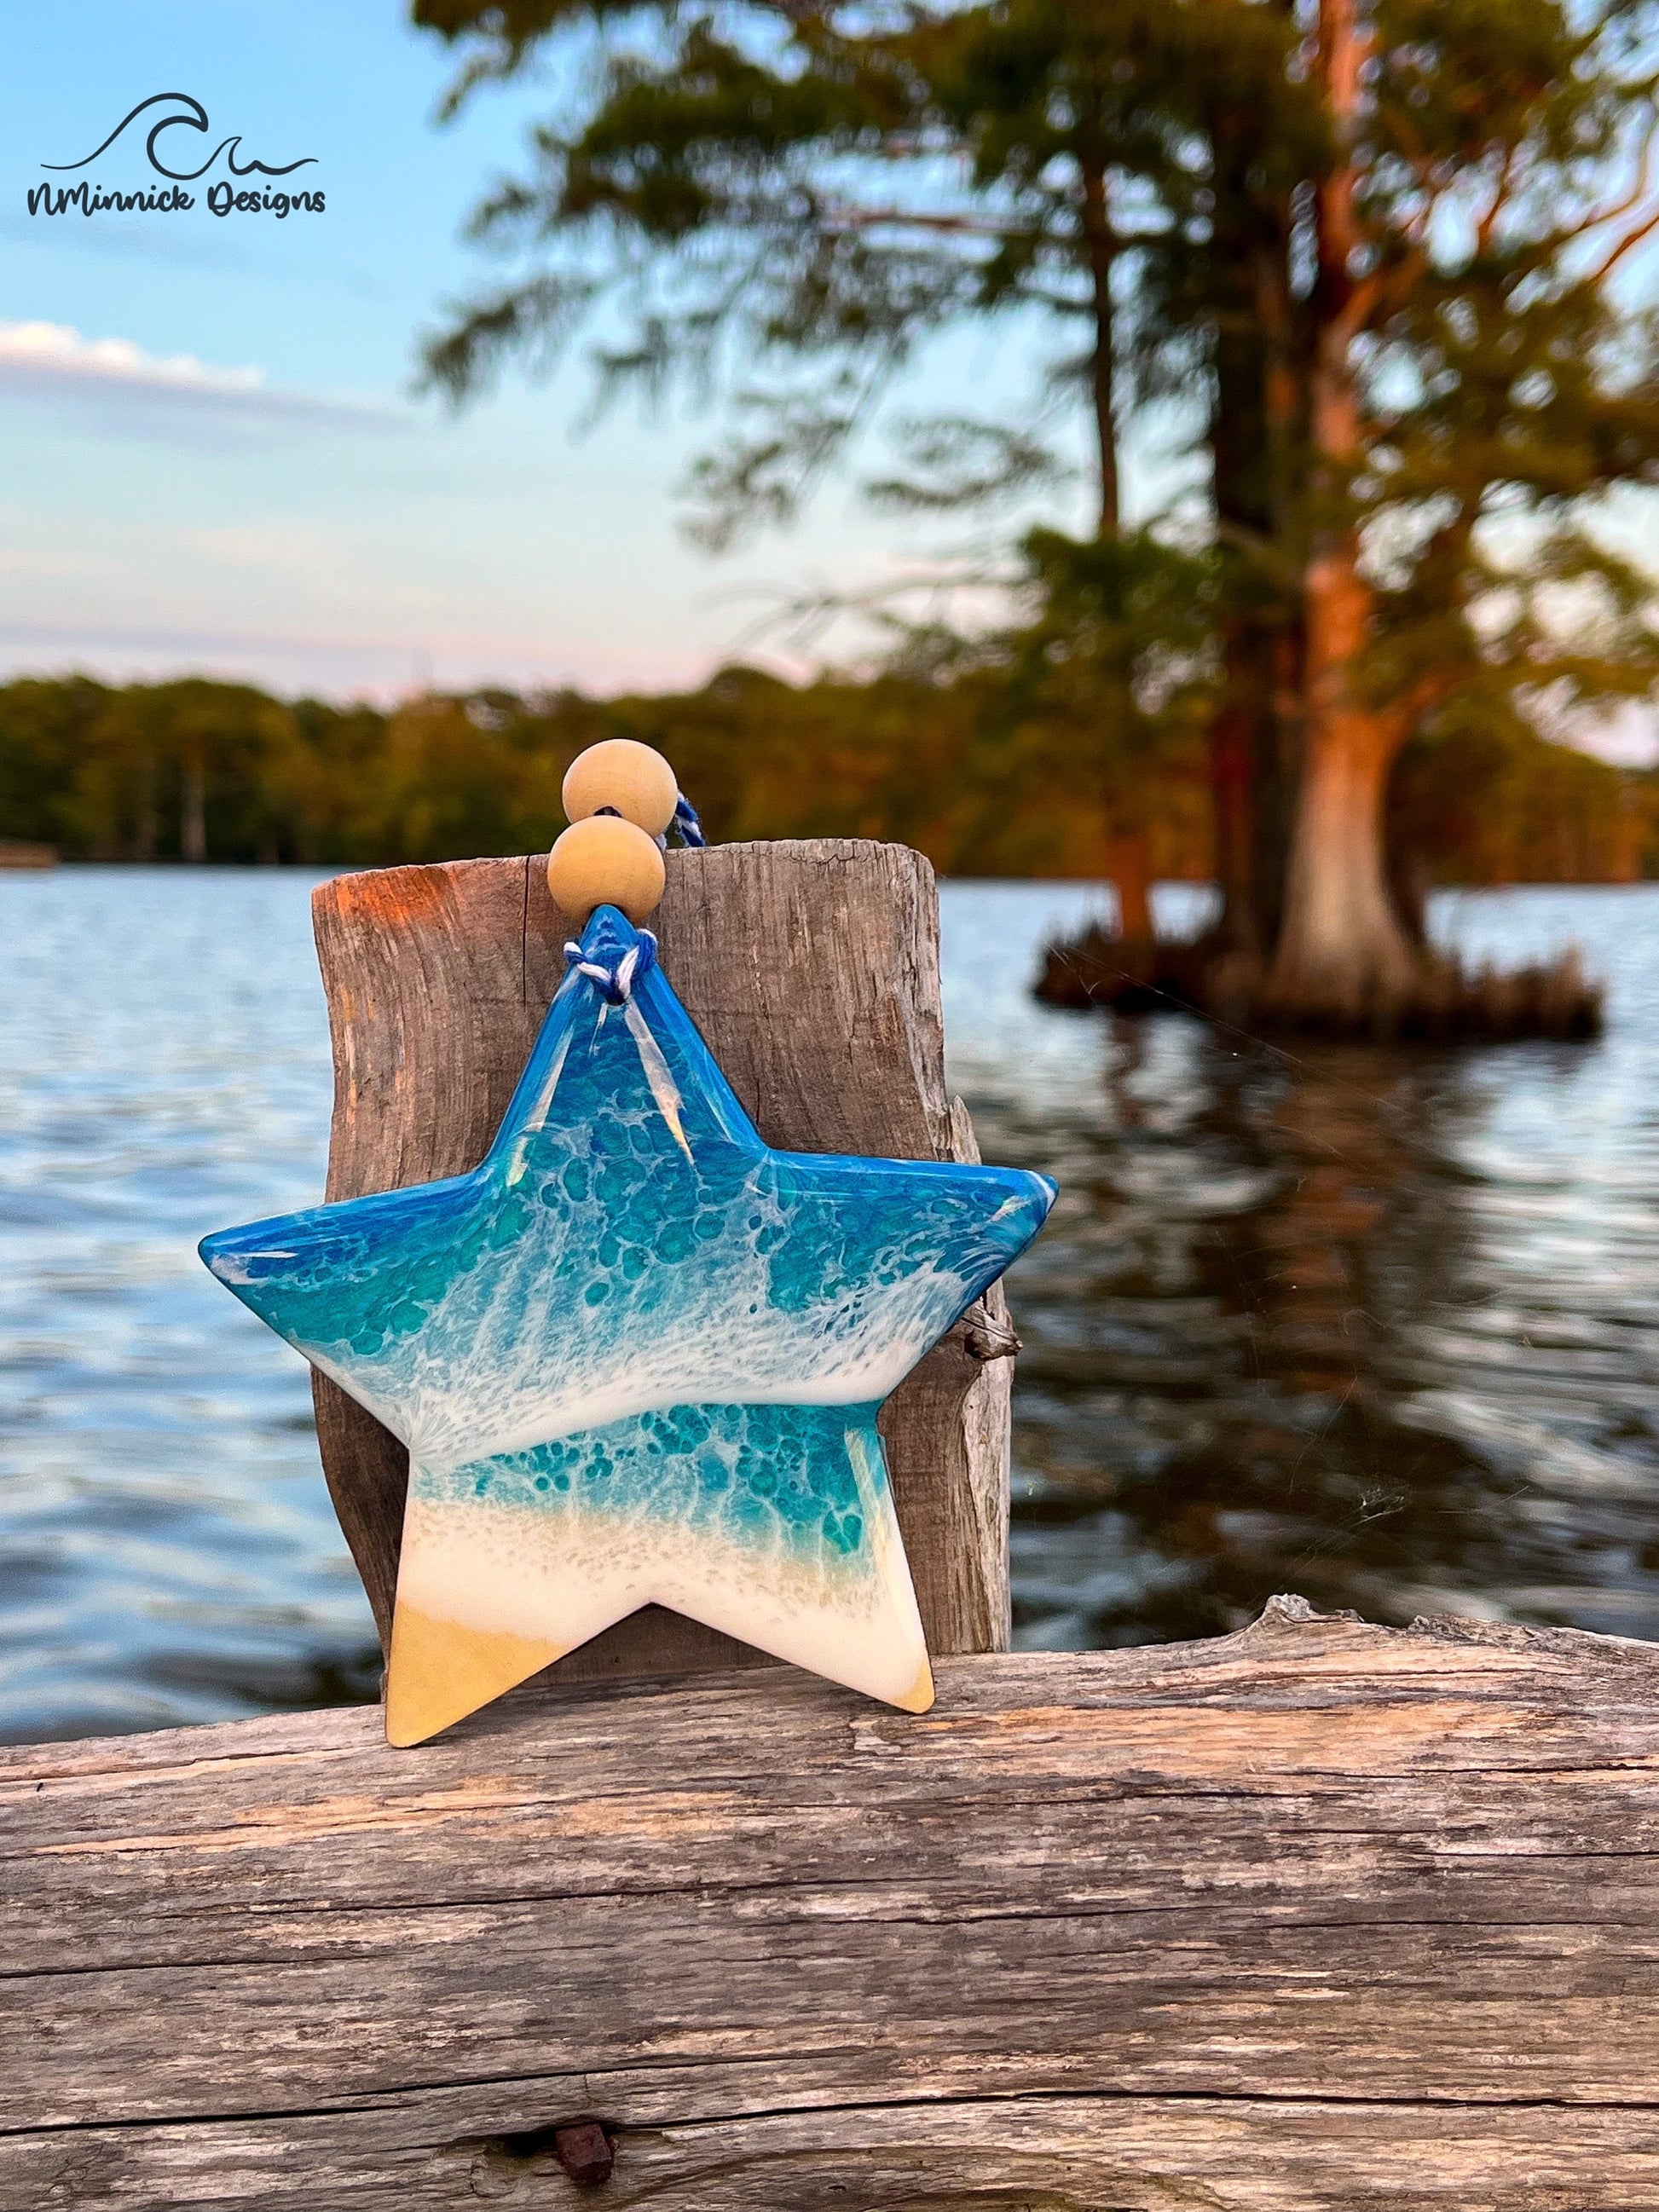 Star-shaped wooden Christmas ornament covered in blue and teal ocean resin art resembling the waves of the ocean.  Finished with blue and white baker's twine and two wooden beads